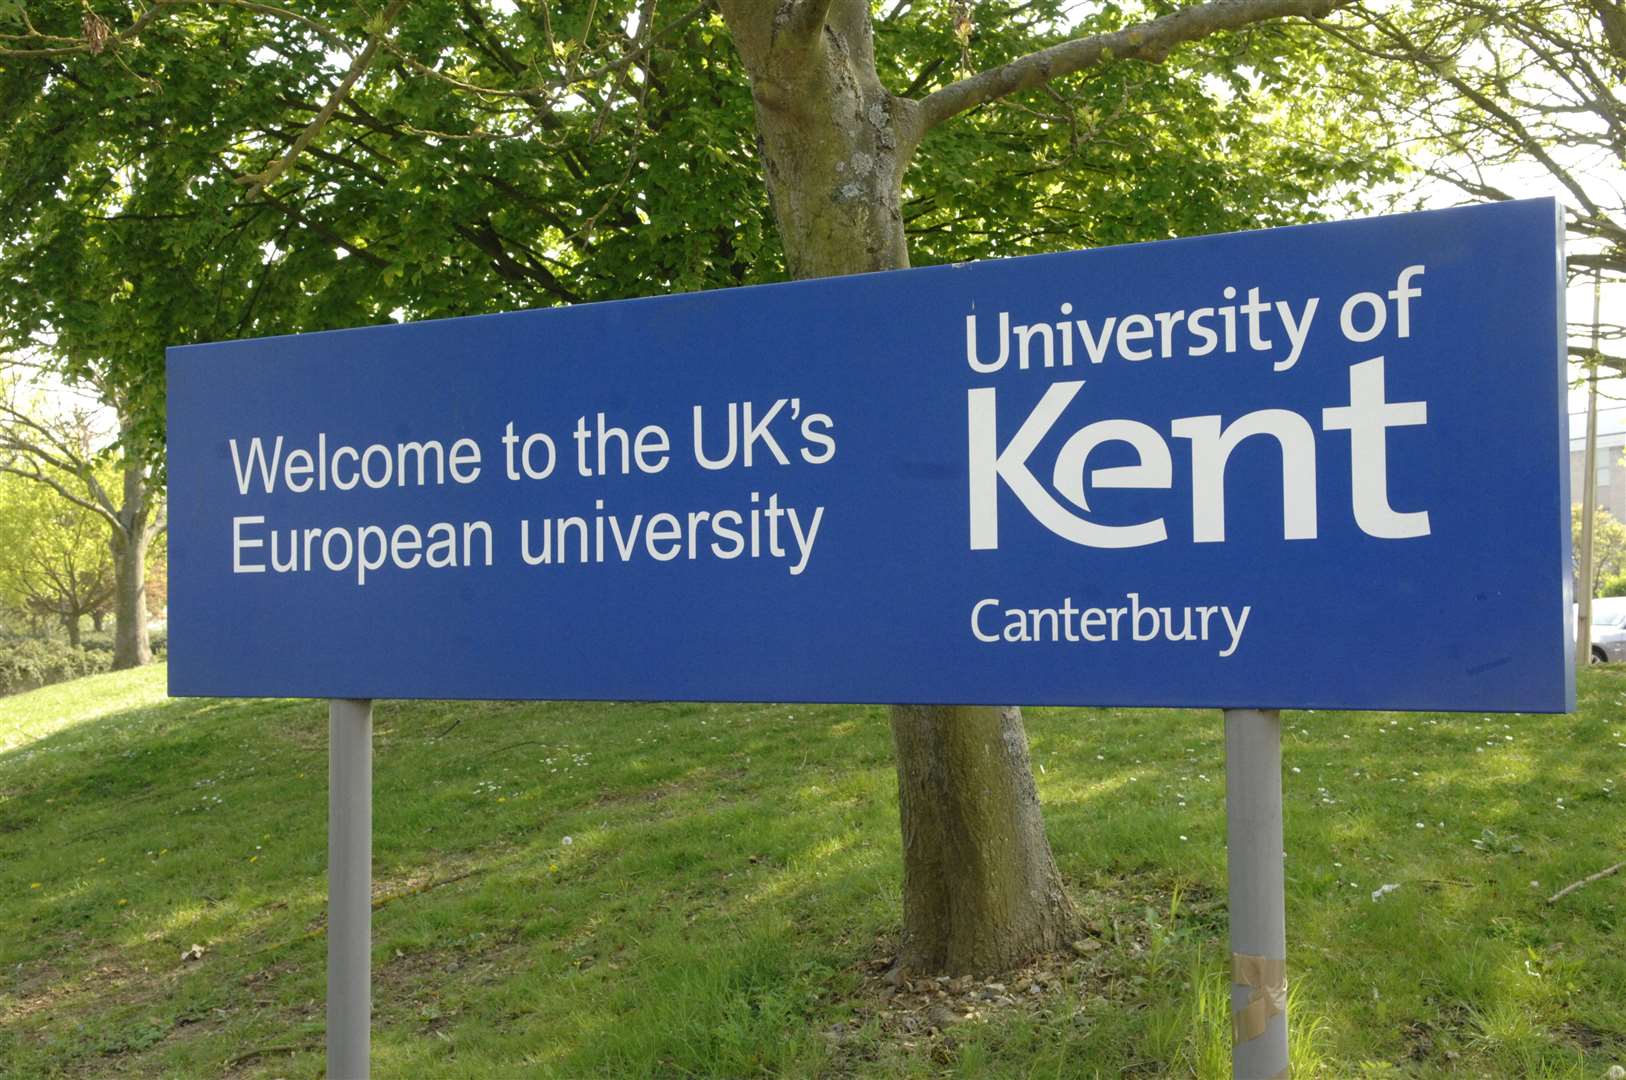 The University of Kent in Canterbury has been struck by tragedy twice in one week